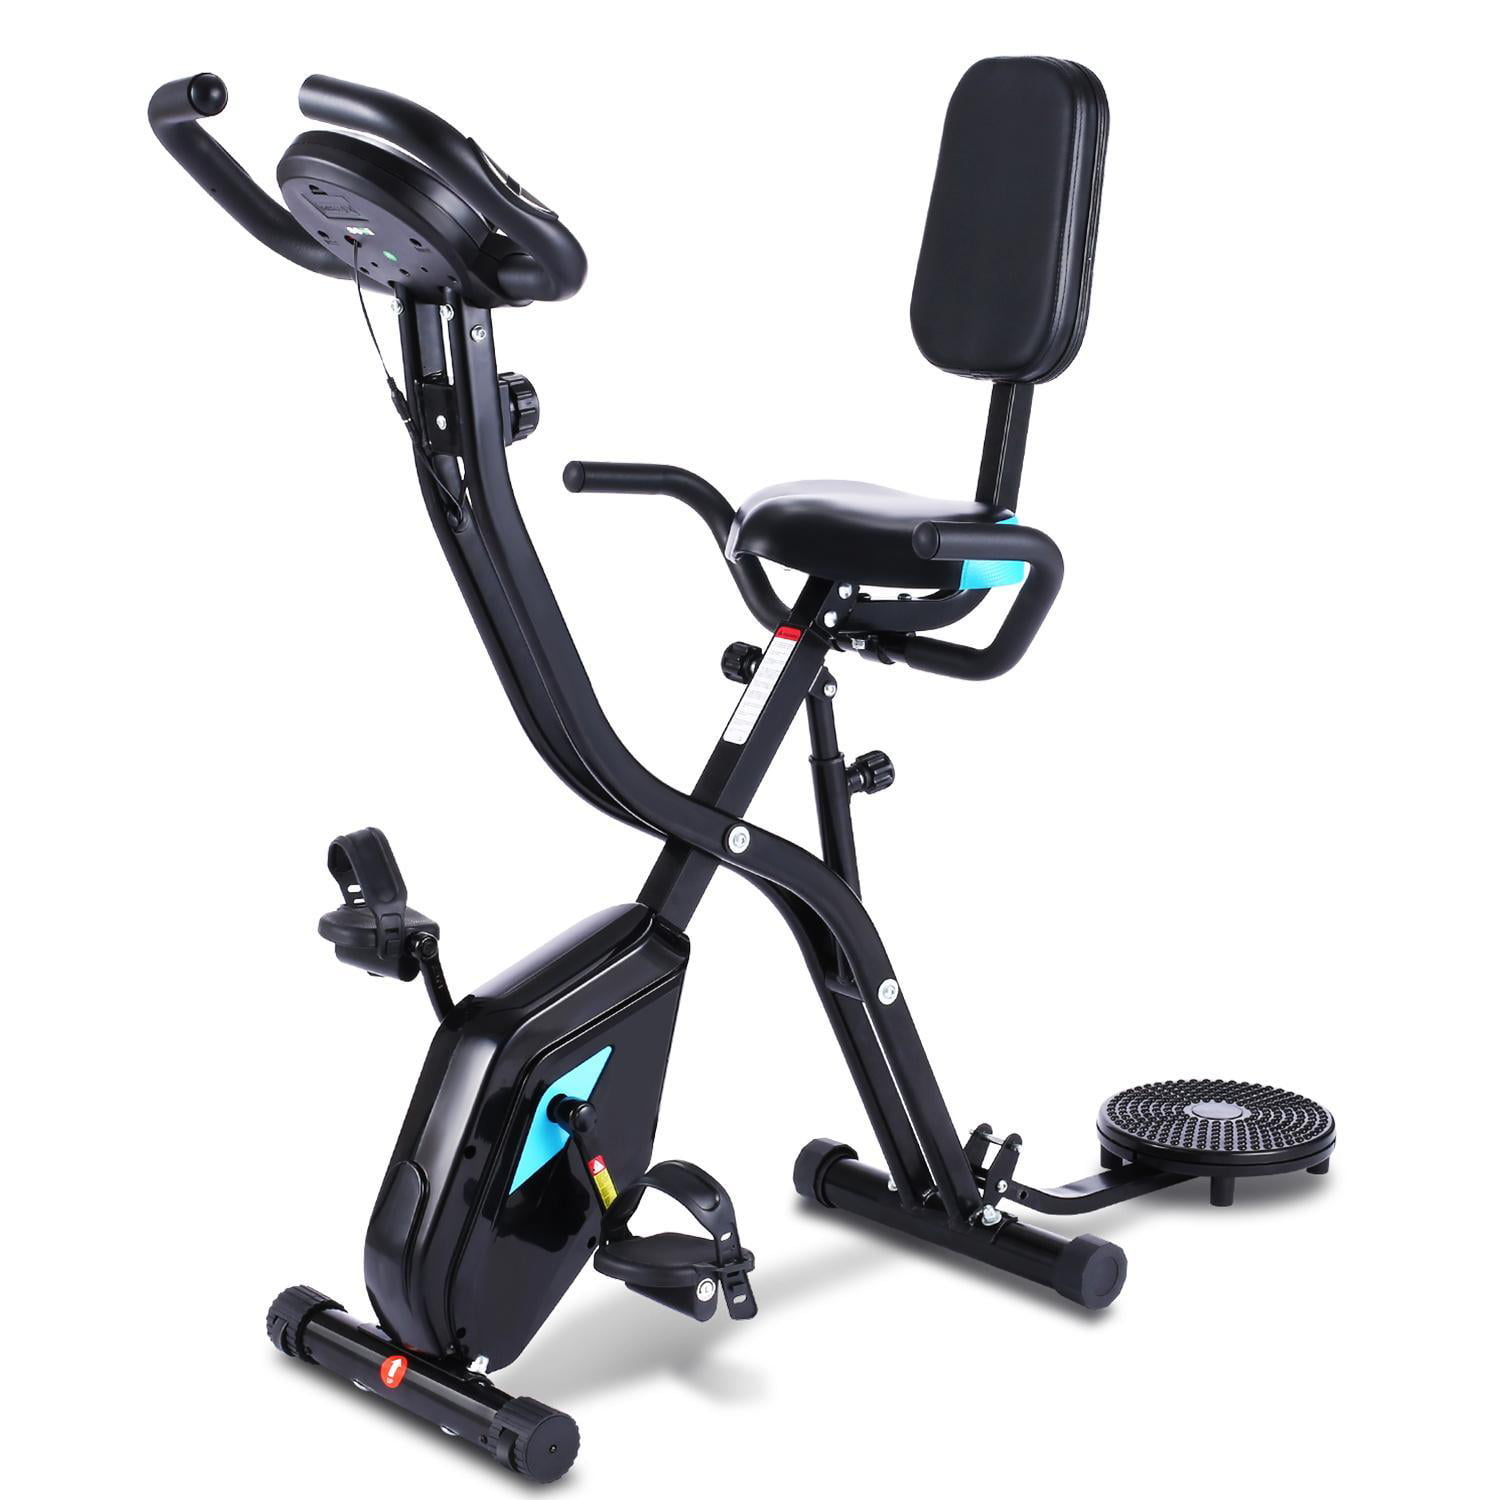 Details about   Indoor Cycle Bike Exercise Bike Stationary Bicycle Home Gym Cardio Trainer Pedal 